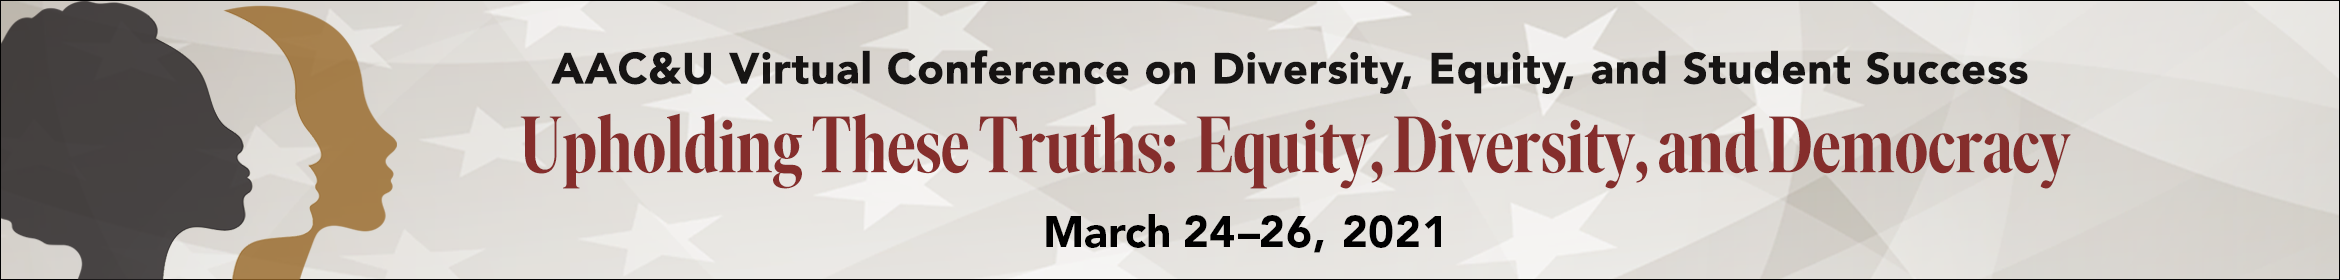 2021 Conference on Diversity, Equity, and Student Success Main banner